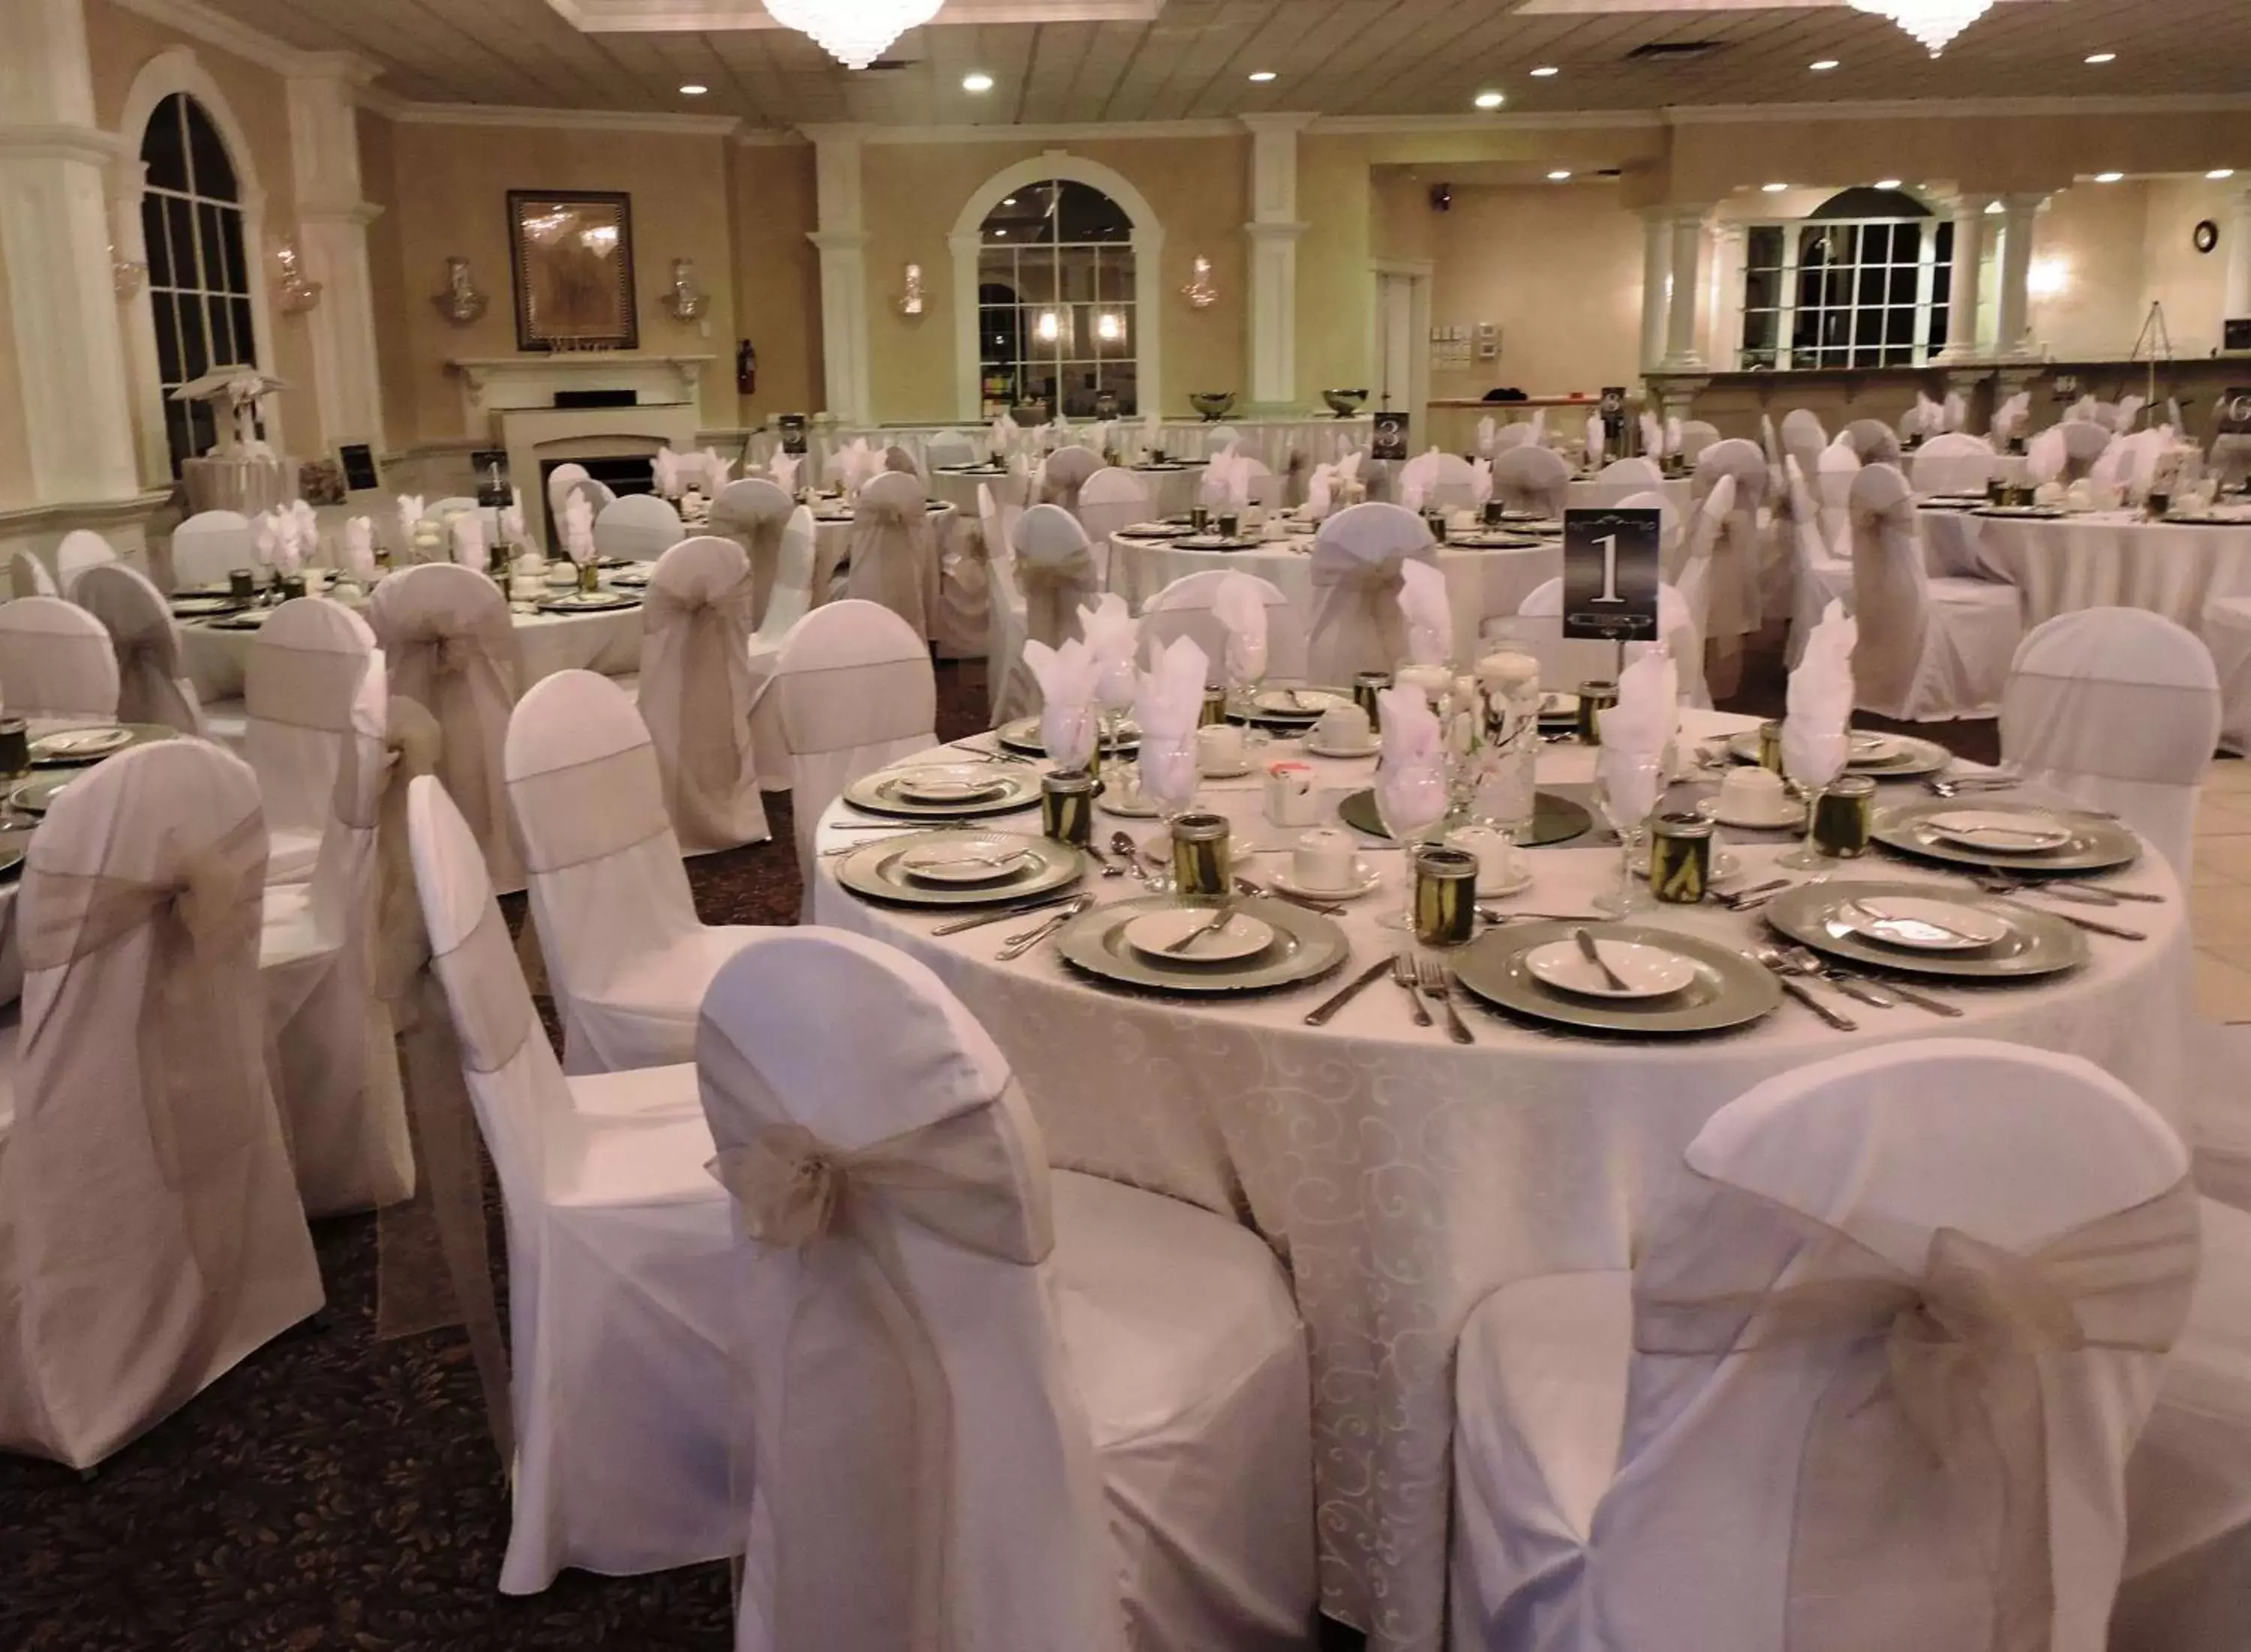 On site, Banquet Facilities in Best Western Plus Mariposa Inn & Conference Centre